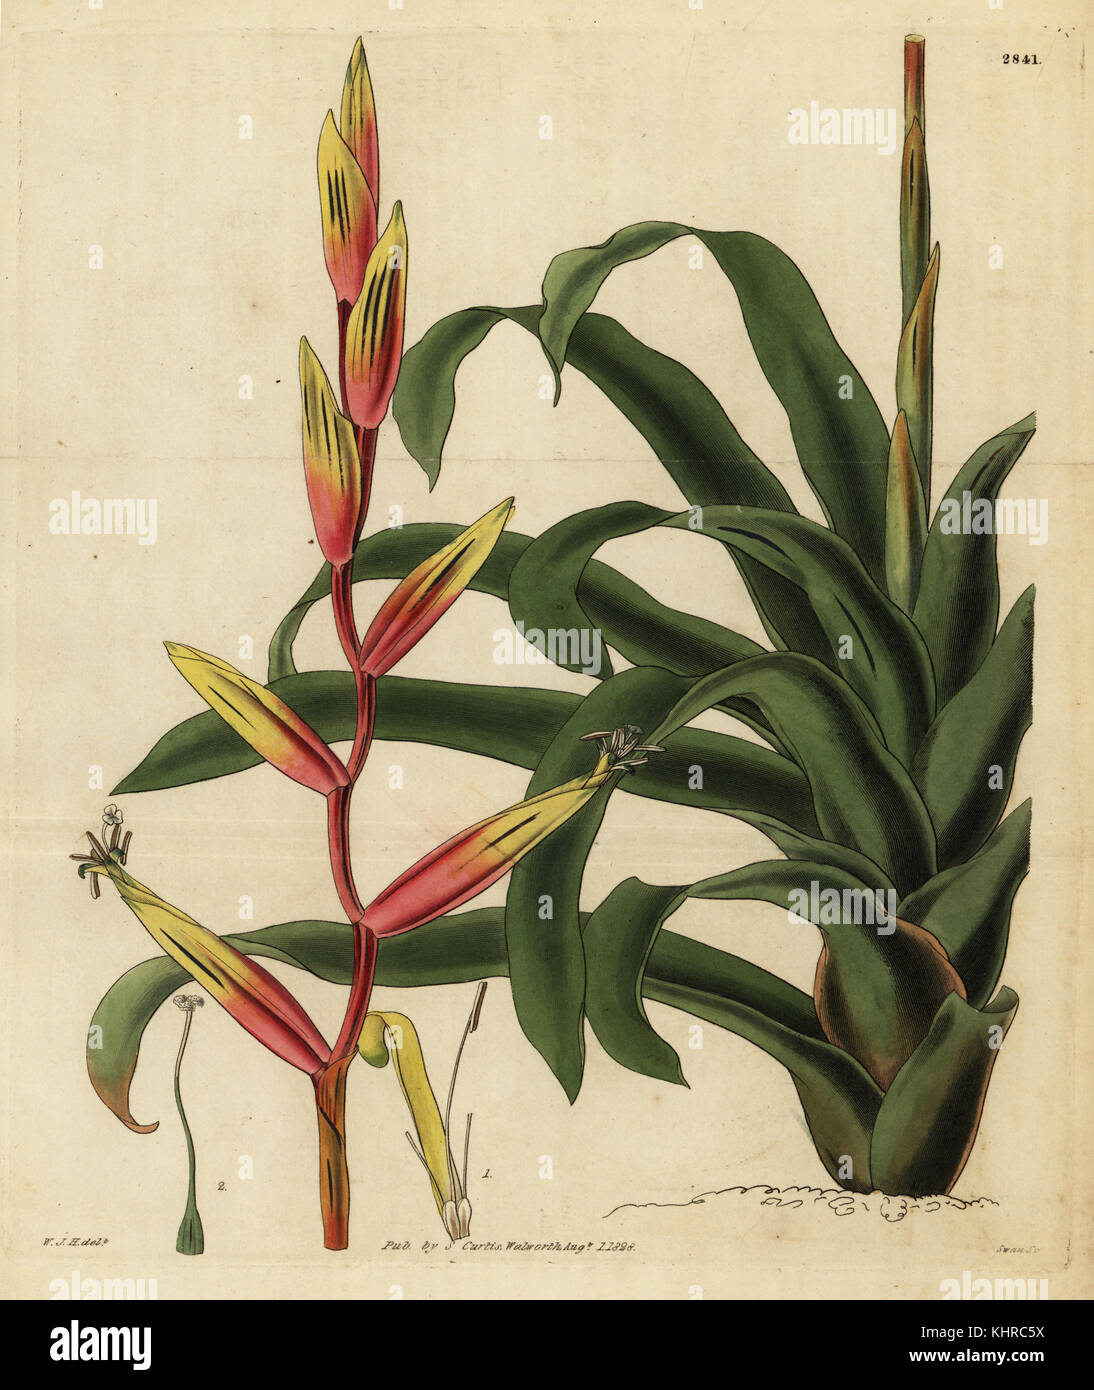 Vriesea psittacina (Gaudy-flowered tillandsia, Tillandsia psittacina). Handcoloured copperplate engraving by Swan after an illustration by William Jackson Hooker from Samuel Curtis' Botanical Magazine, London, 1828. Stock Photo